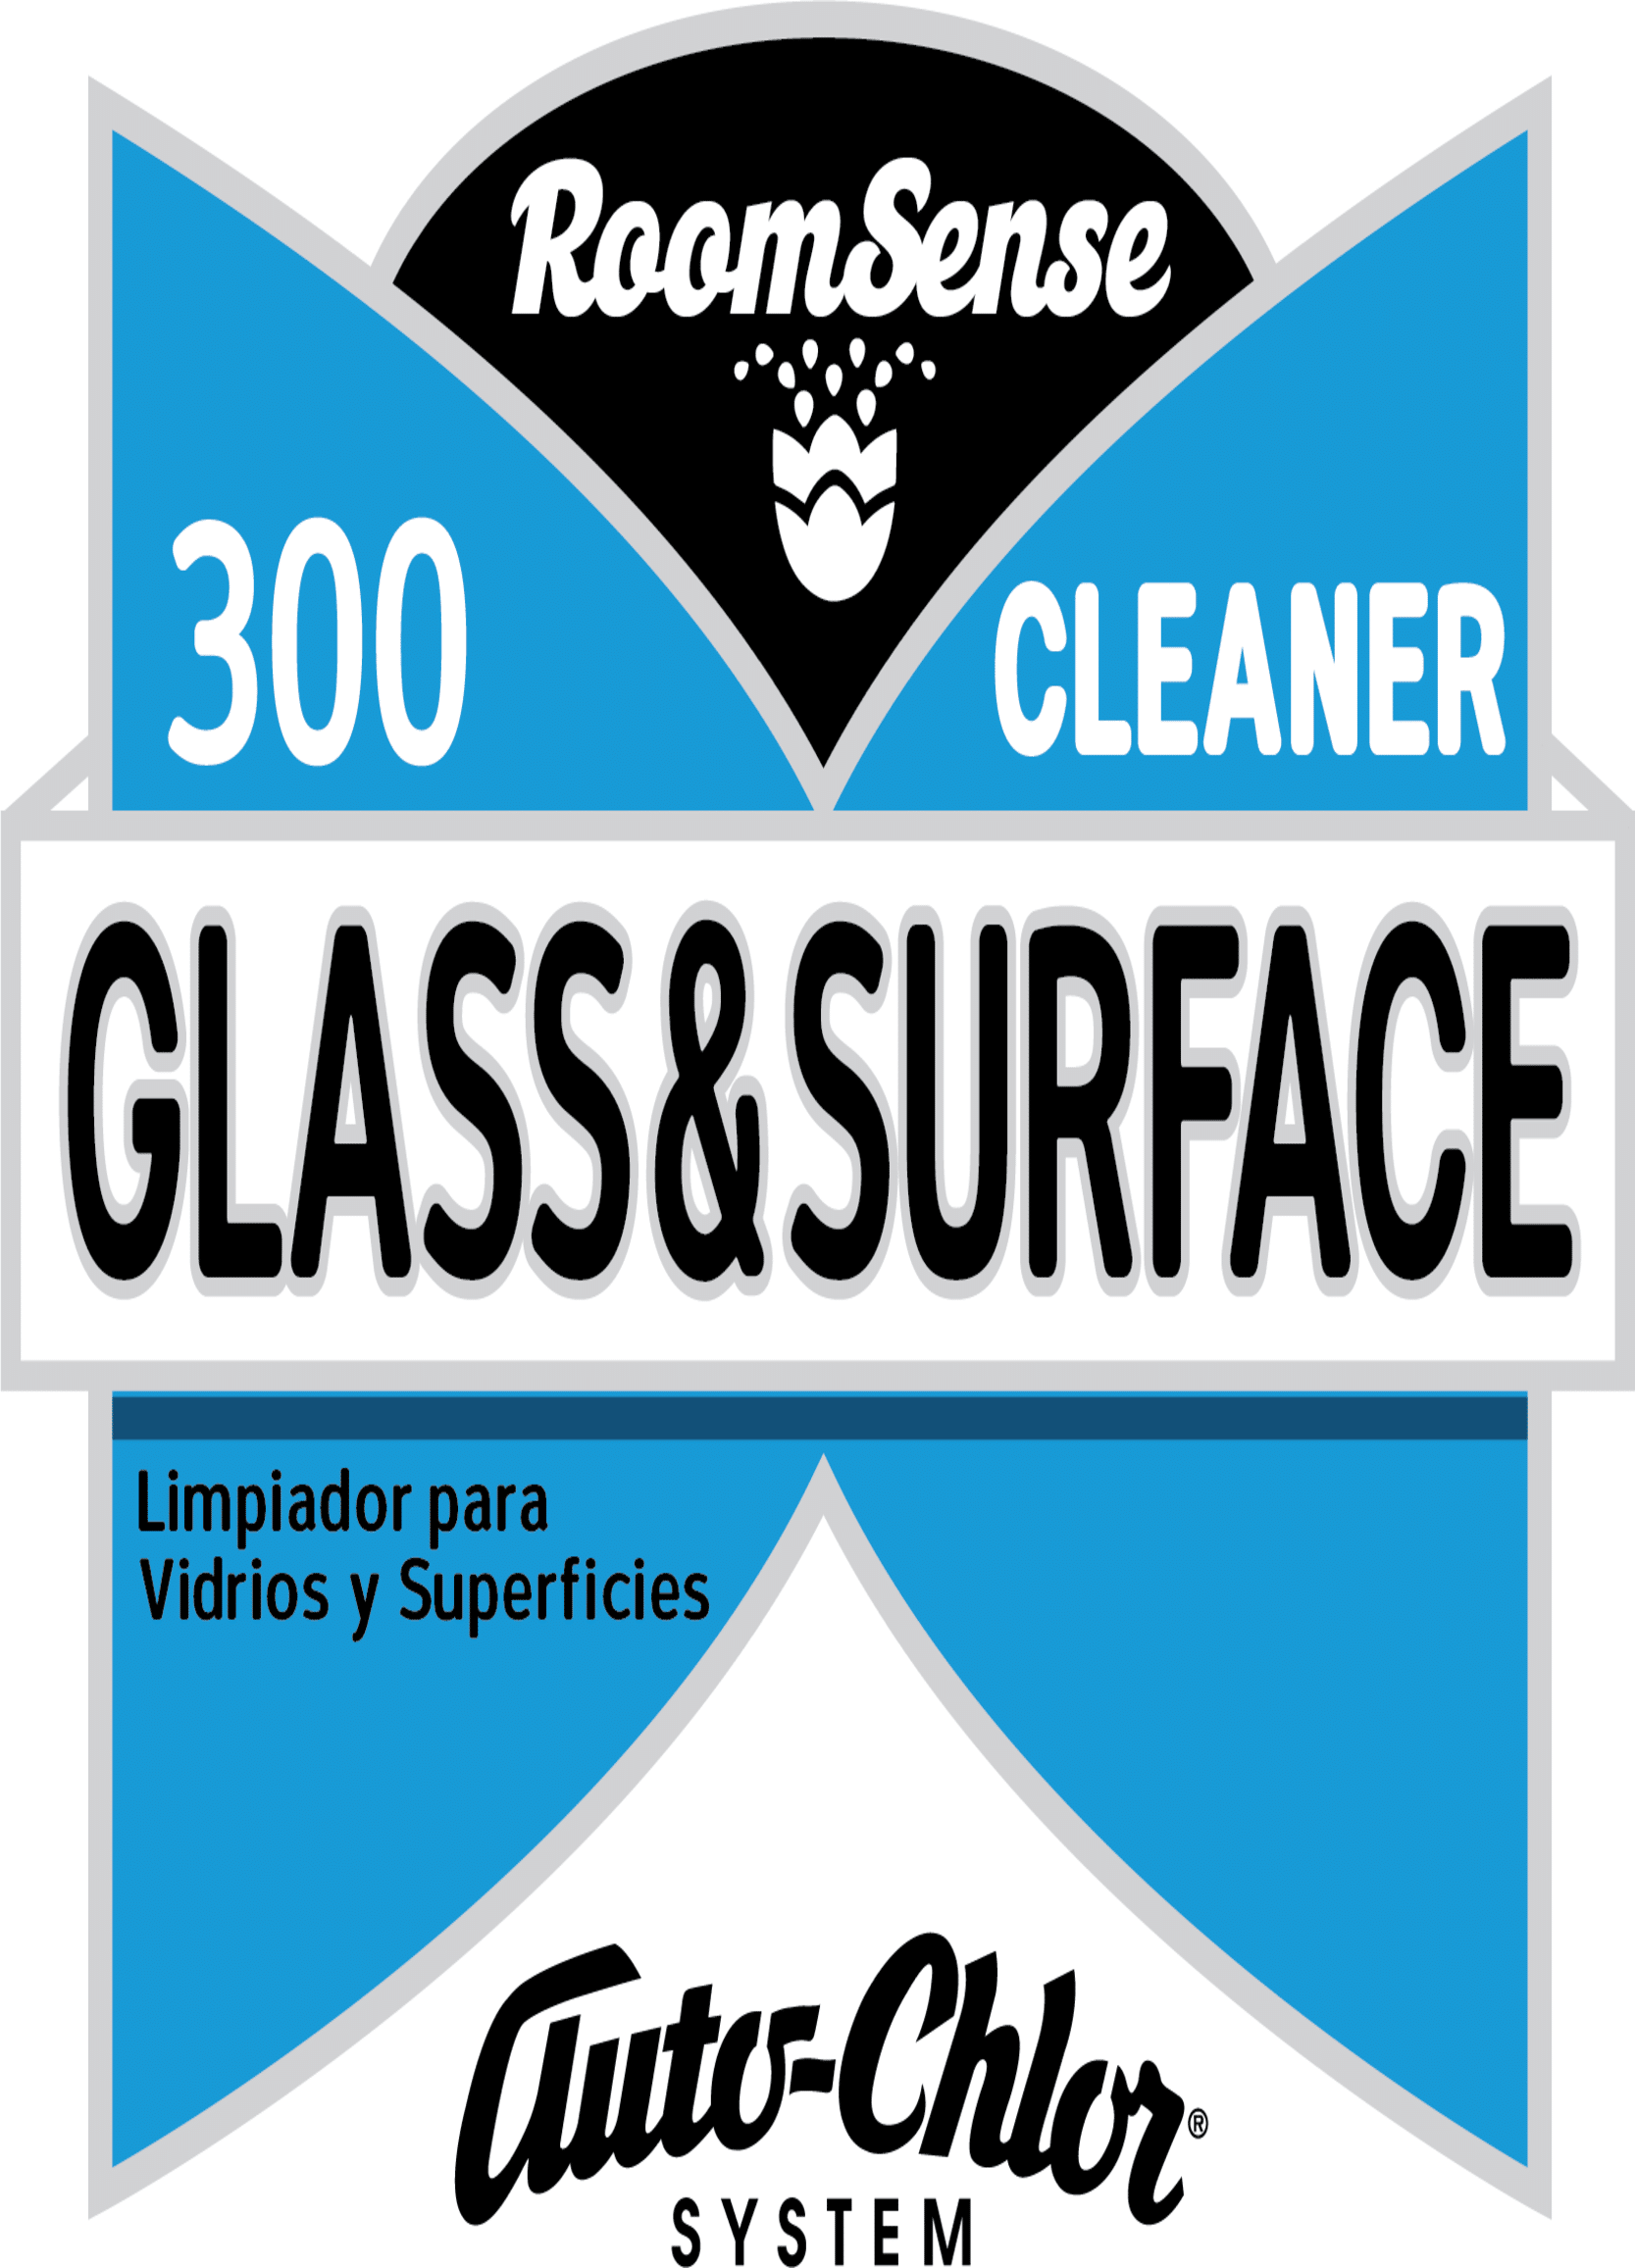 Roomsense-300 Glass Surface Cleaner